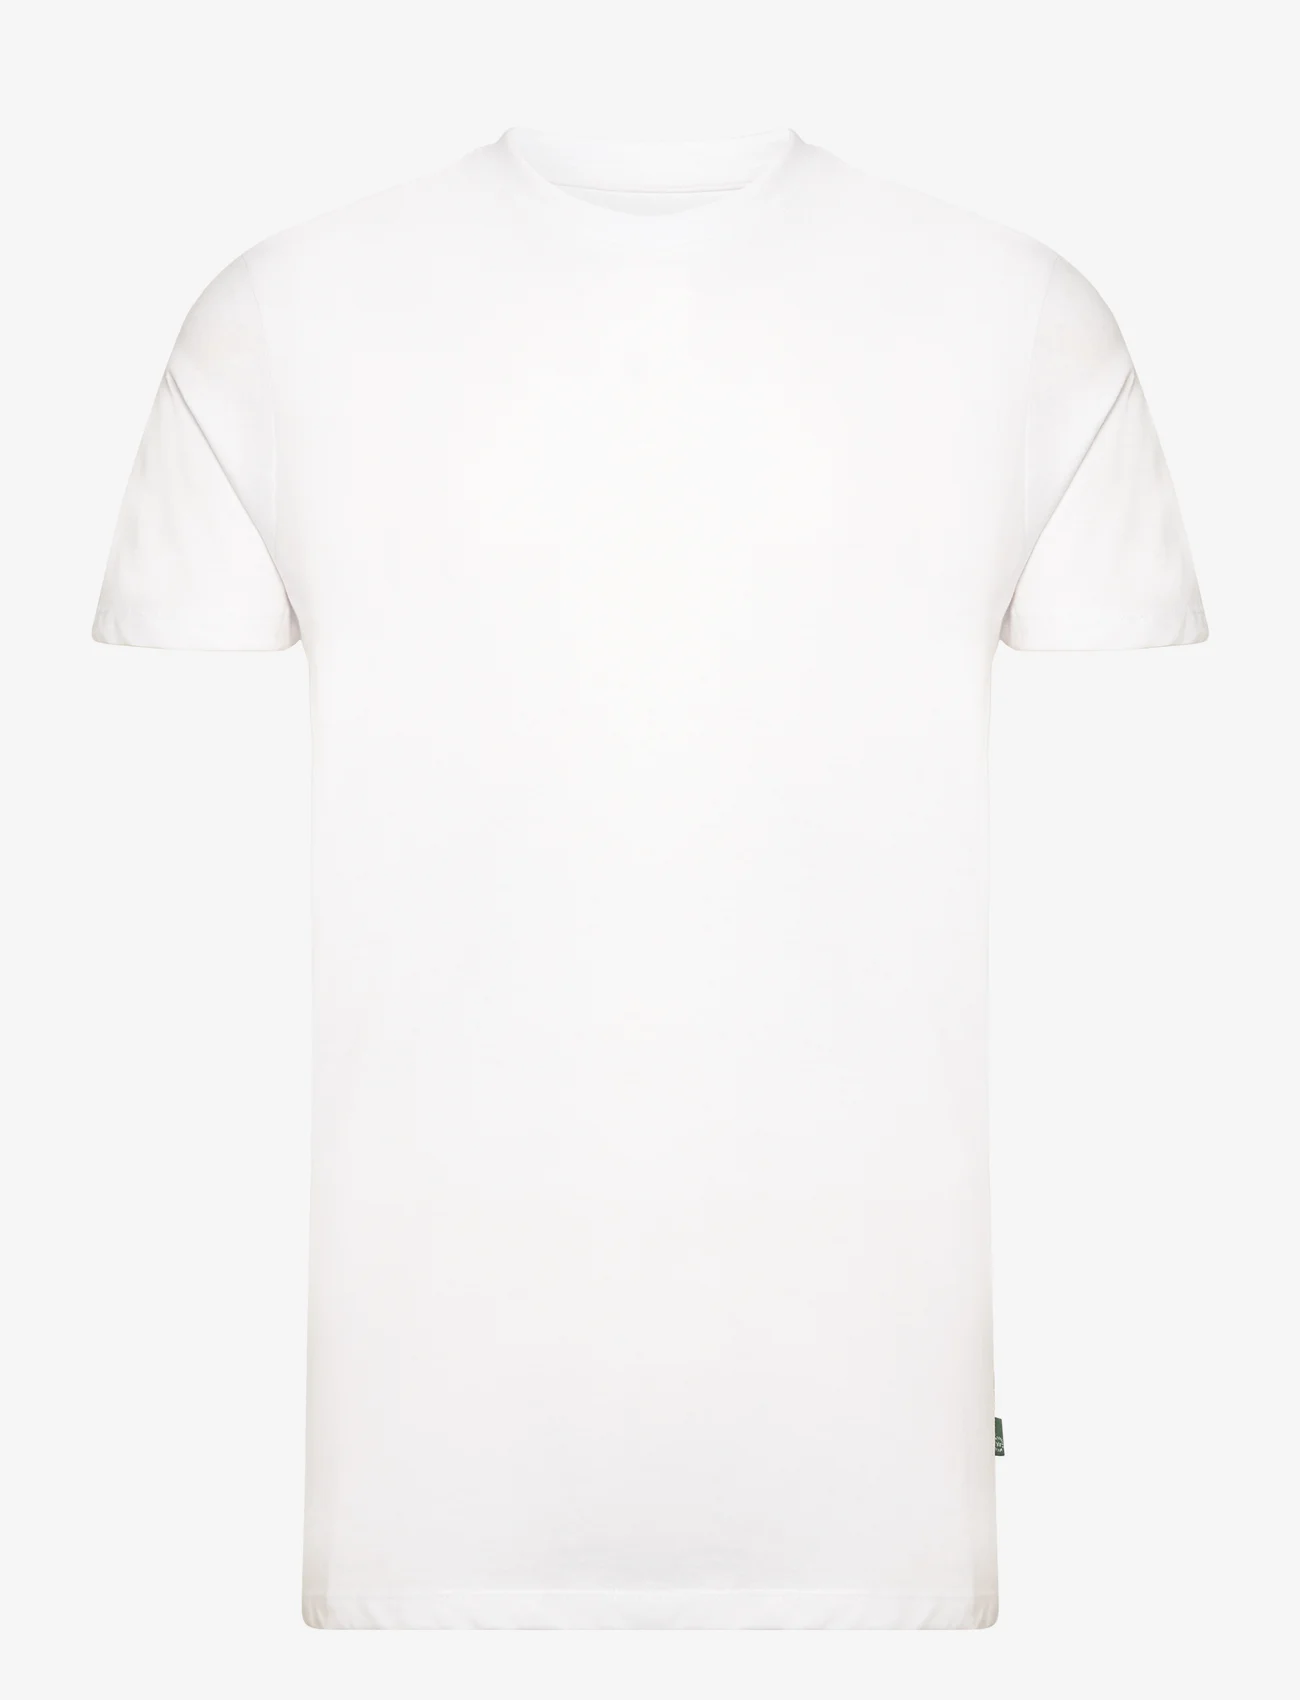 Kronstadt - Timmi Organic / Recycle Tee - t-shirts - white - 0